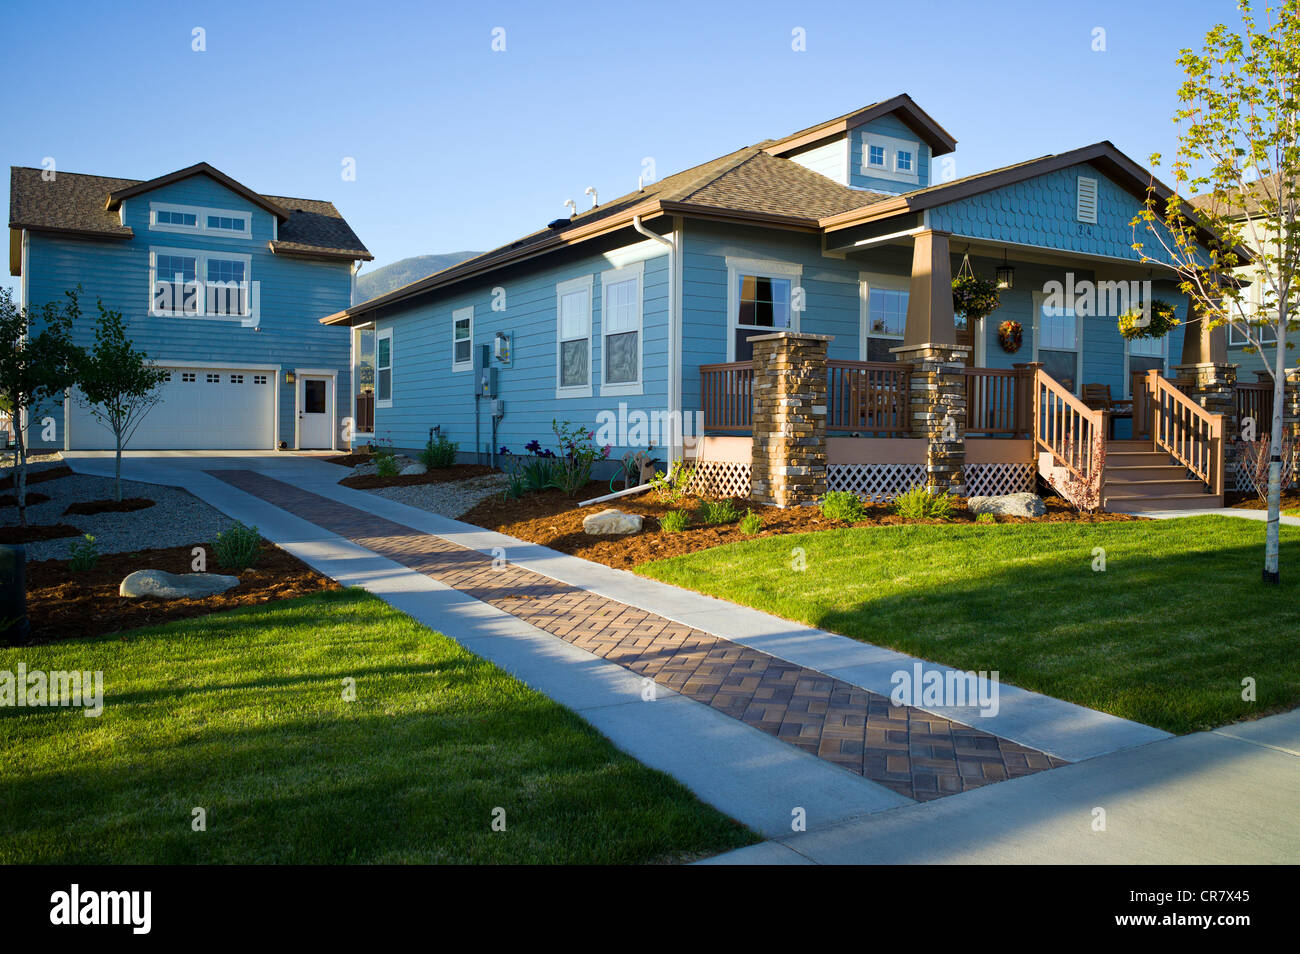 Craftsman Style residential home in Colorado, USA Stock Photo